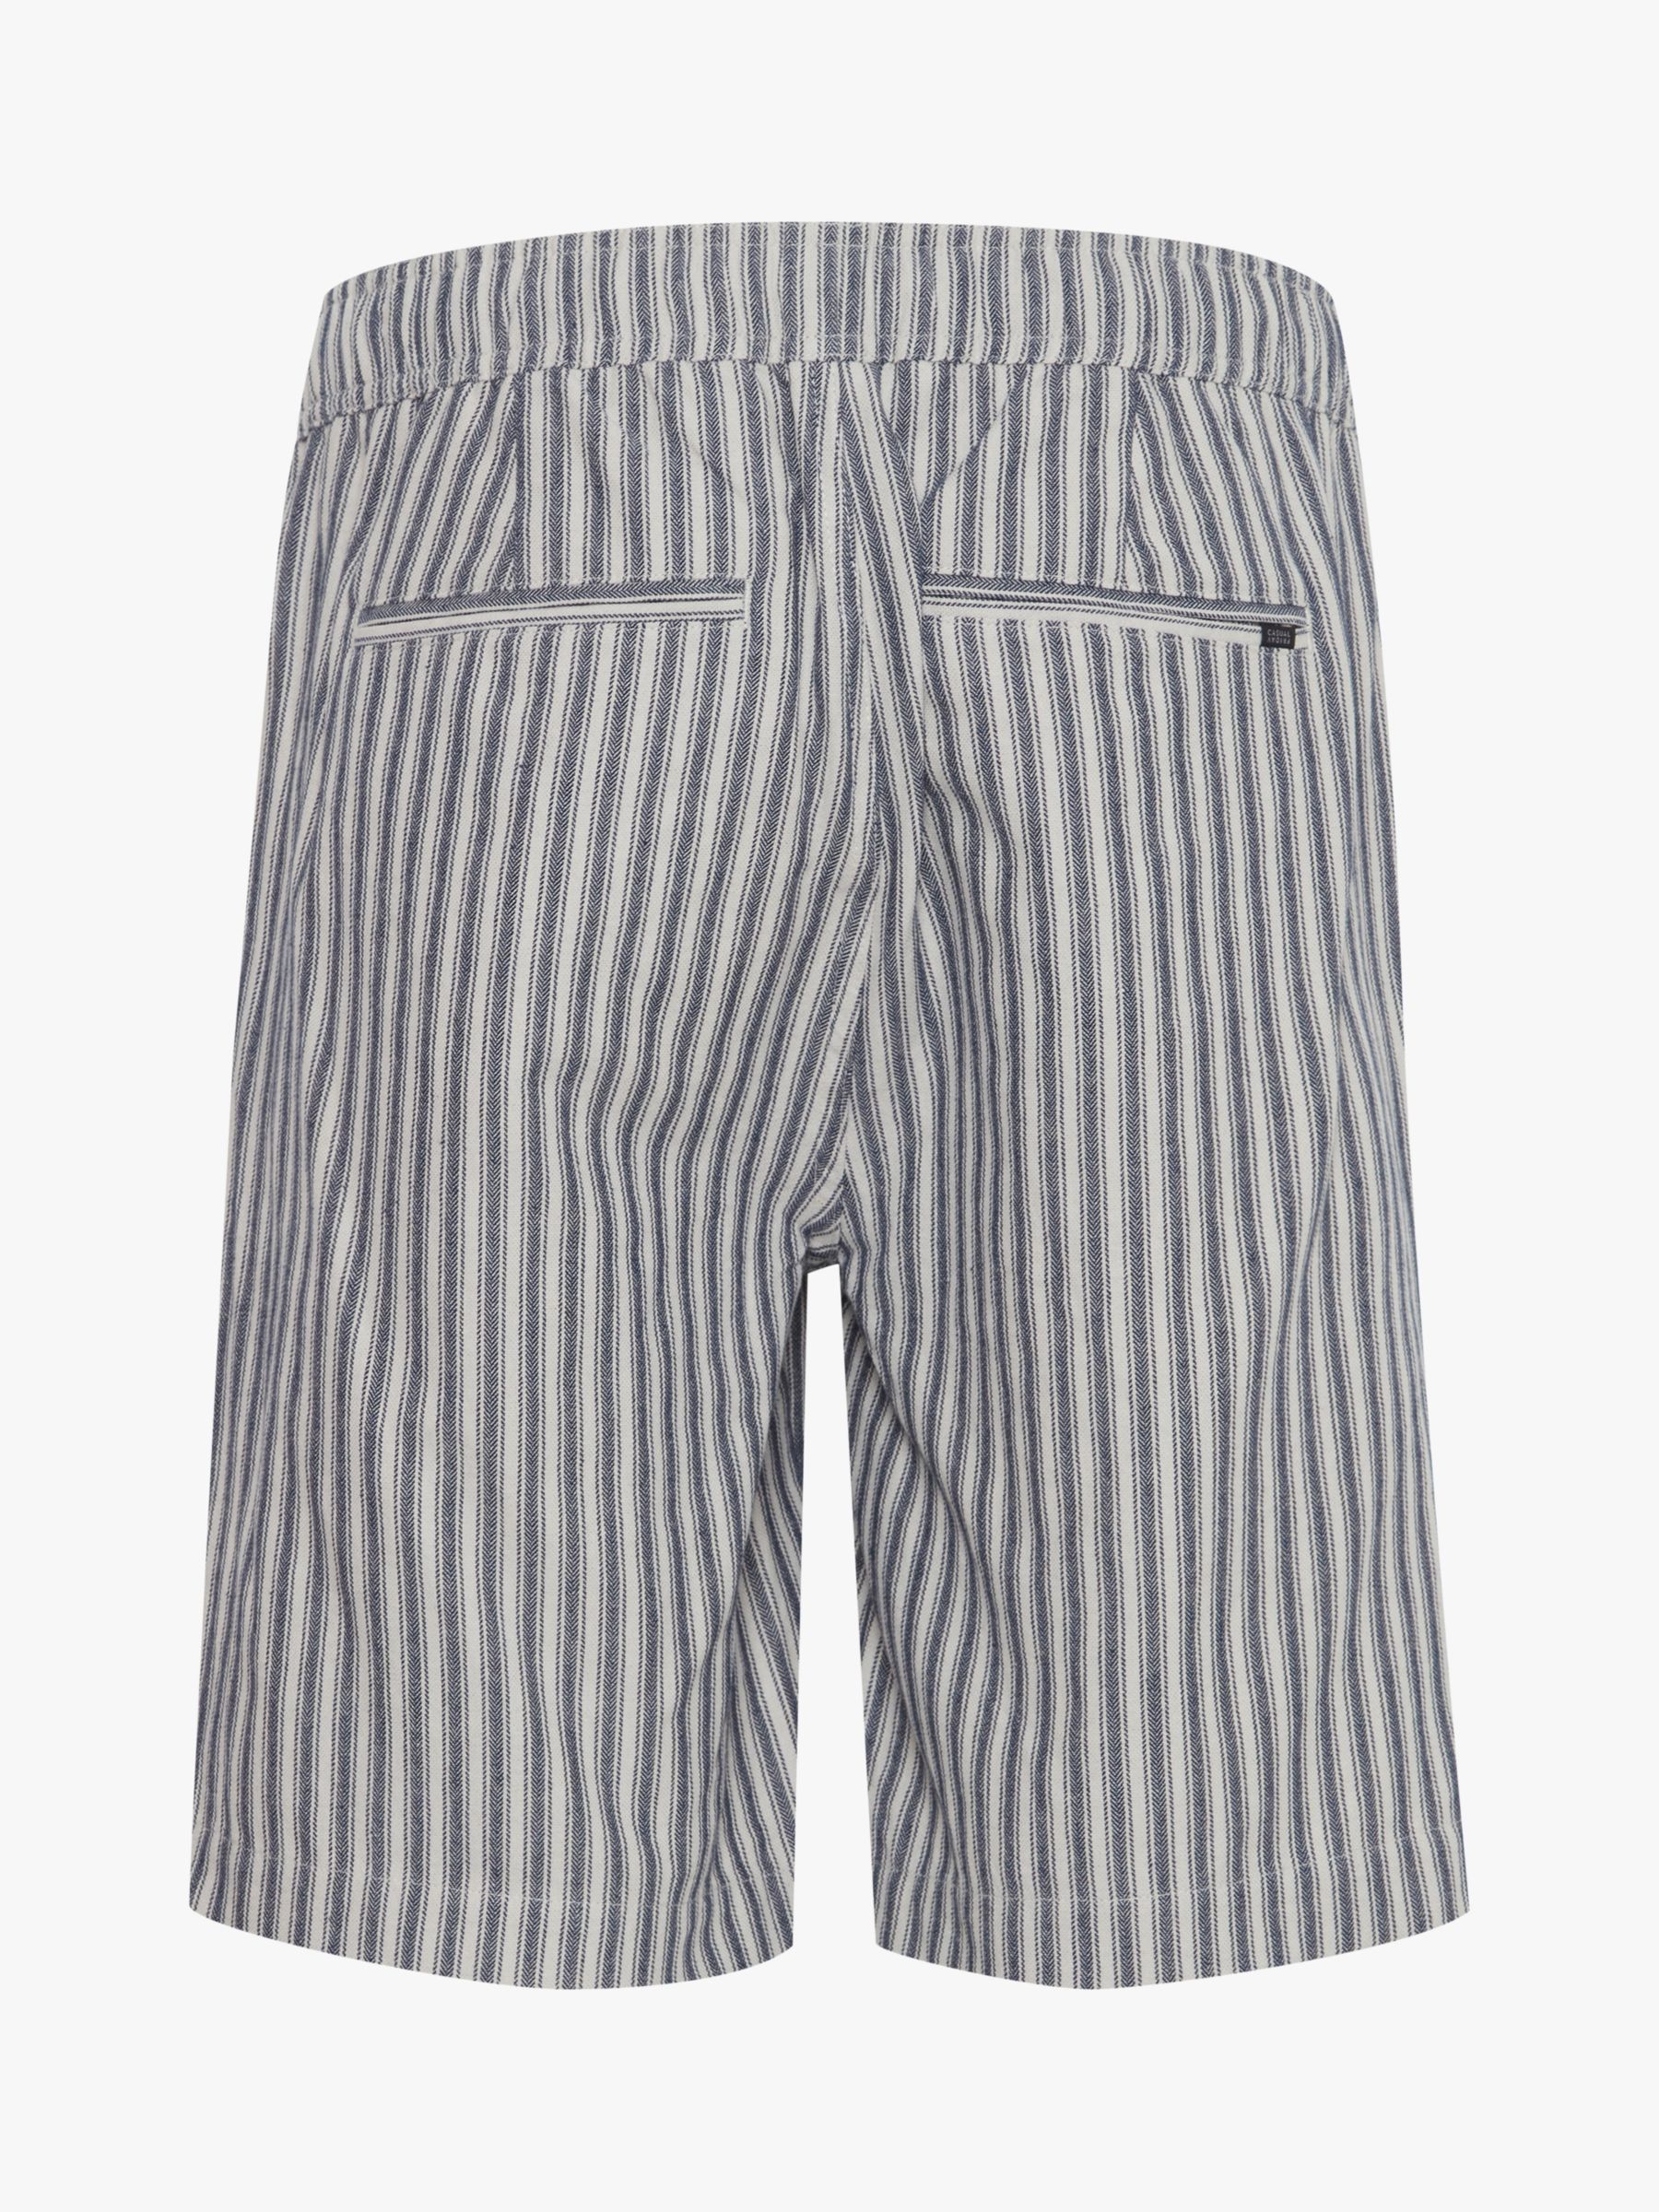 Casual Friday Phelix Linen Mix Striped Shorts, Navy/White, S